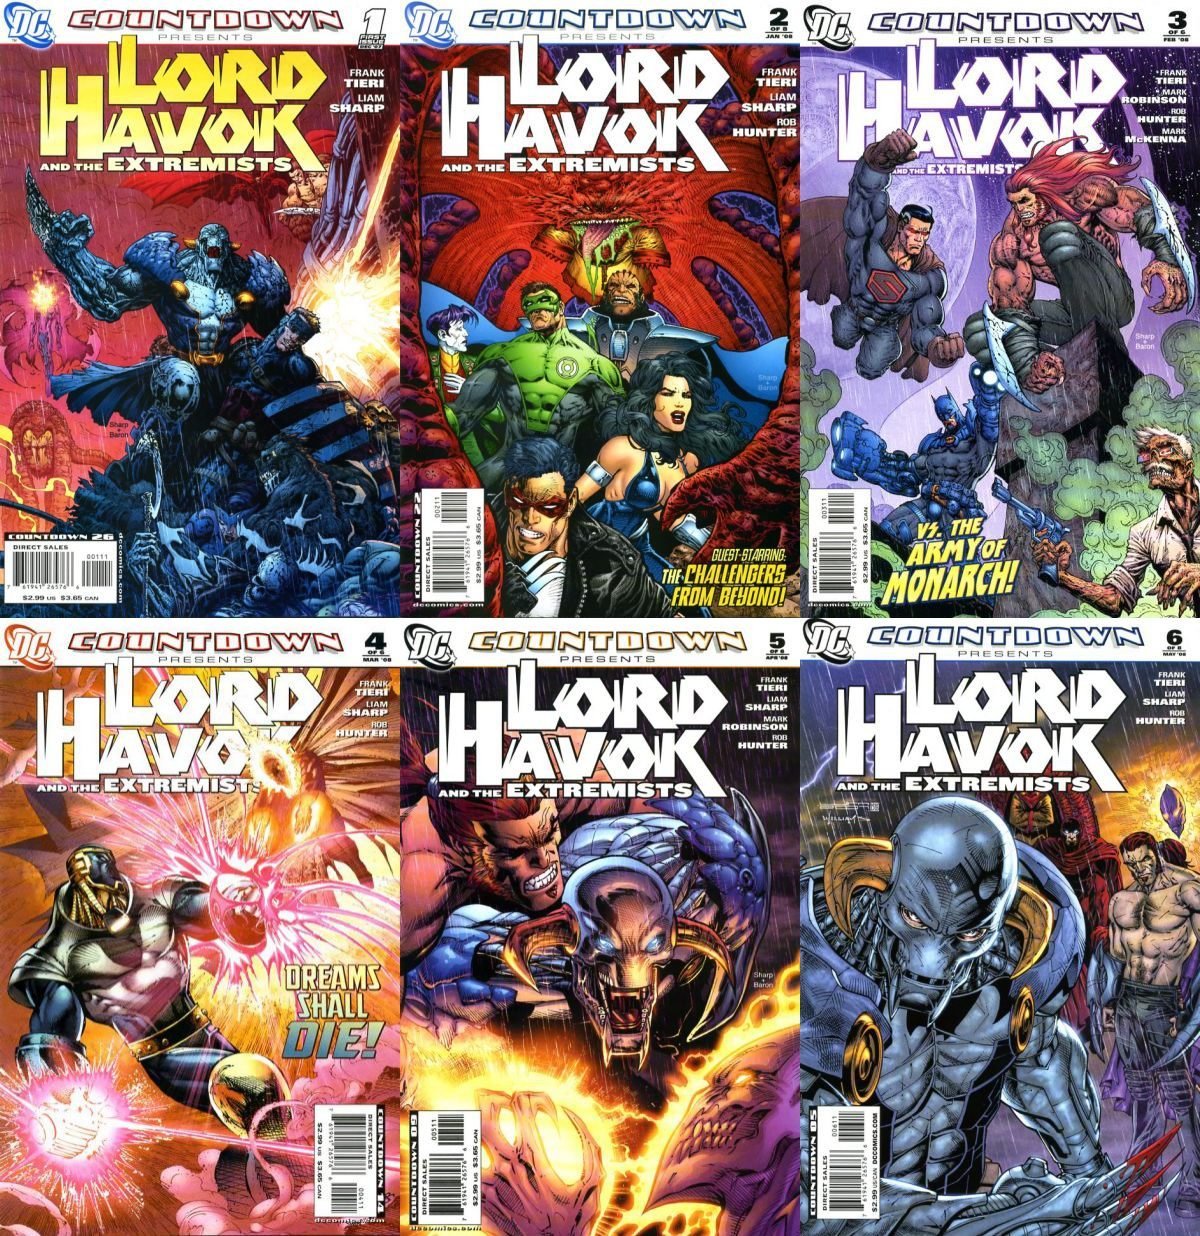 Countdown Presents Lord Havok and The Extremists #1-5 (2007-2008)  DC - 6 Comics